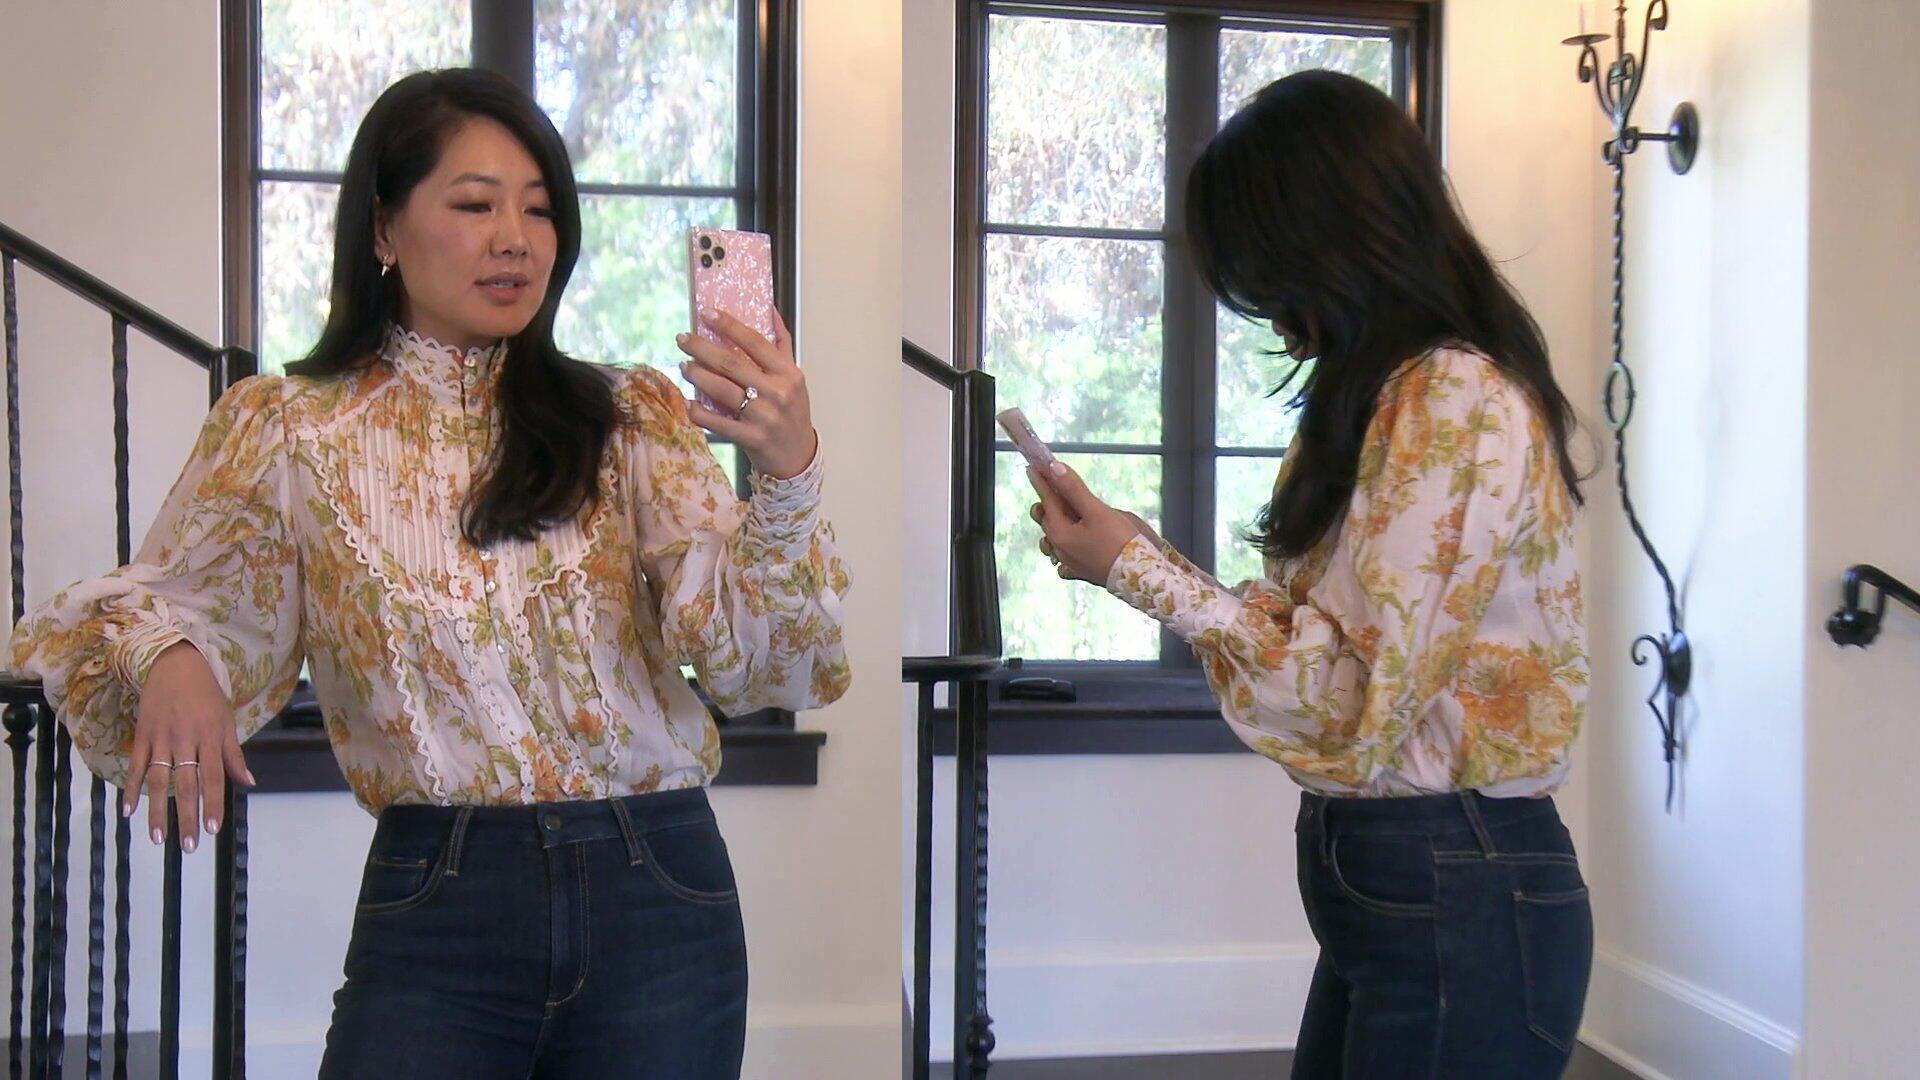 Crystal Kung Minkoff - The Real Housewives of Beverly Hills | Season 12 Episode 16 | Crystal Kung Minkoff style